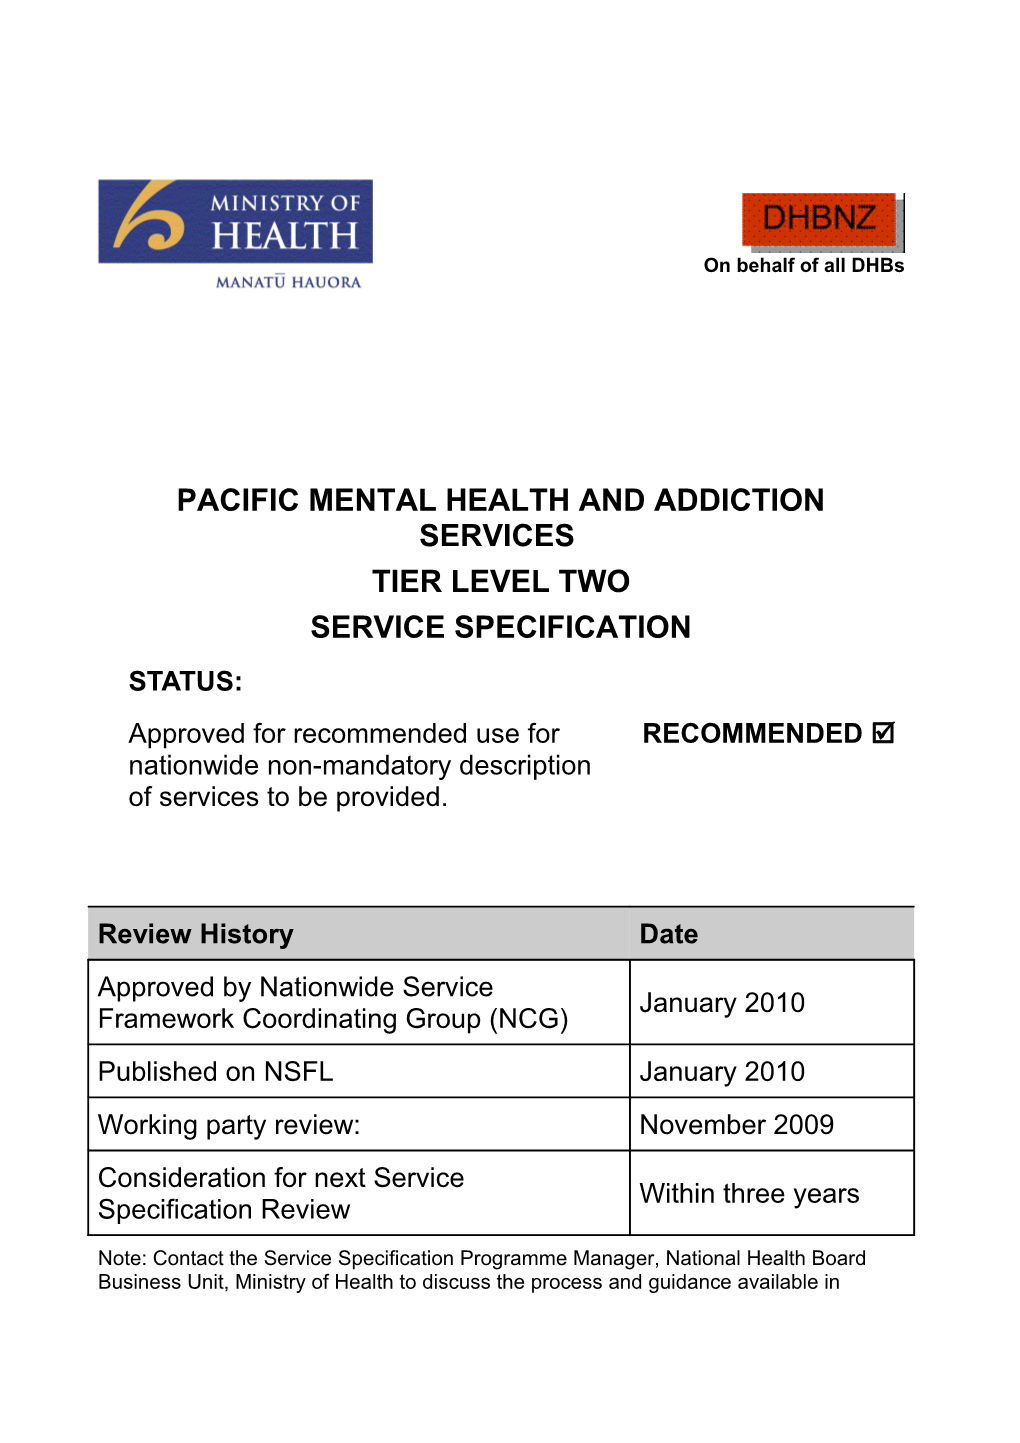 Pacific Mental Health and Addiction